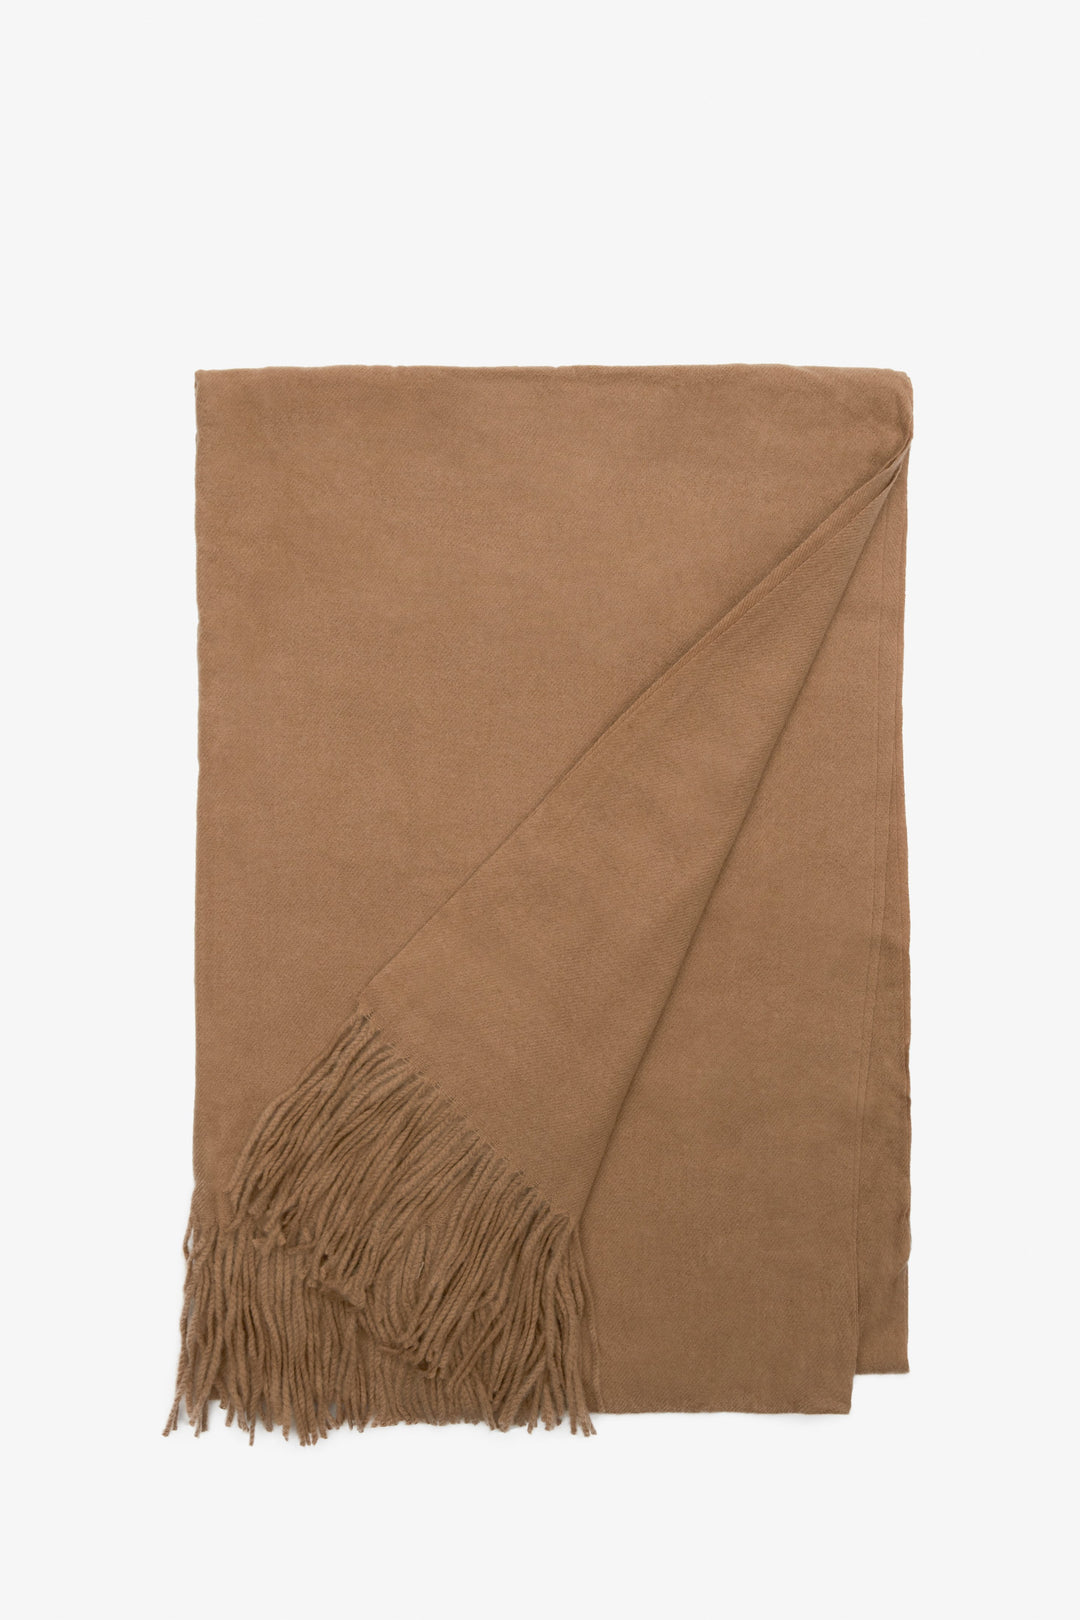 Stylish women's scarf with fringes in brown by Estro.